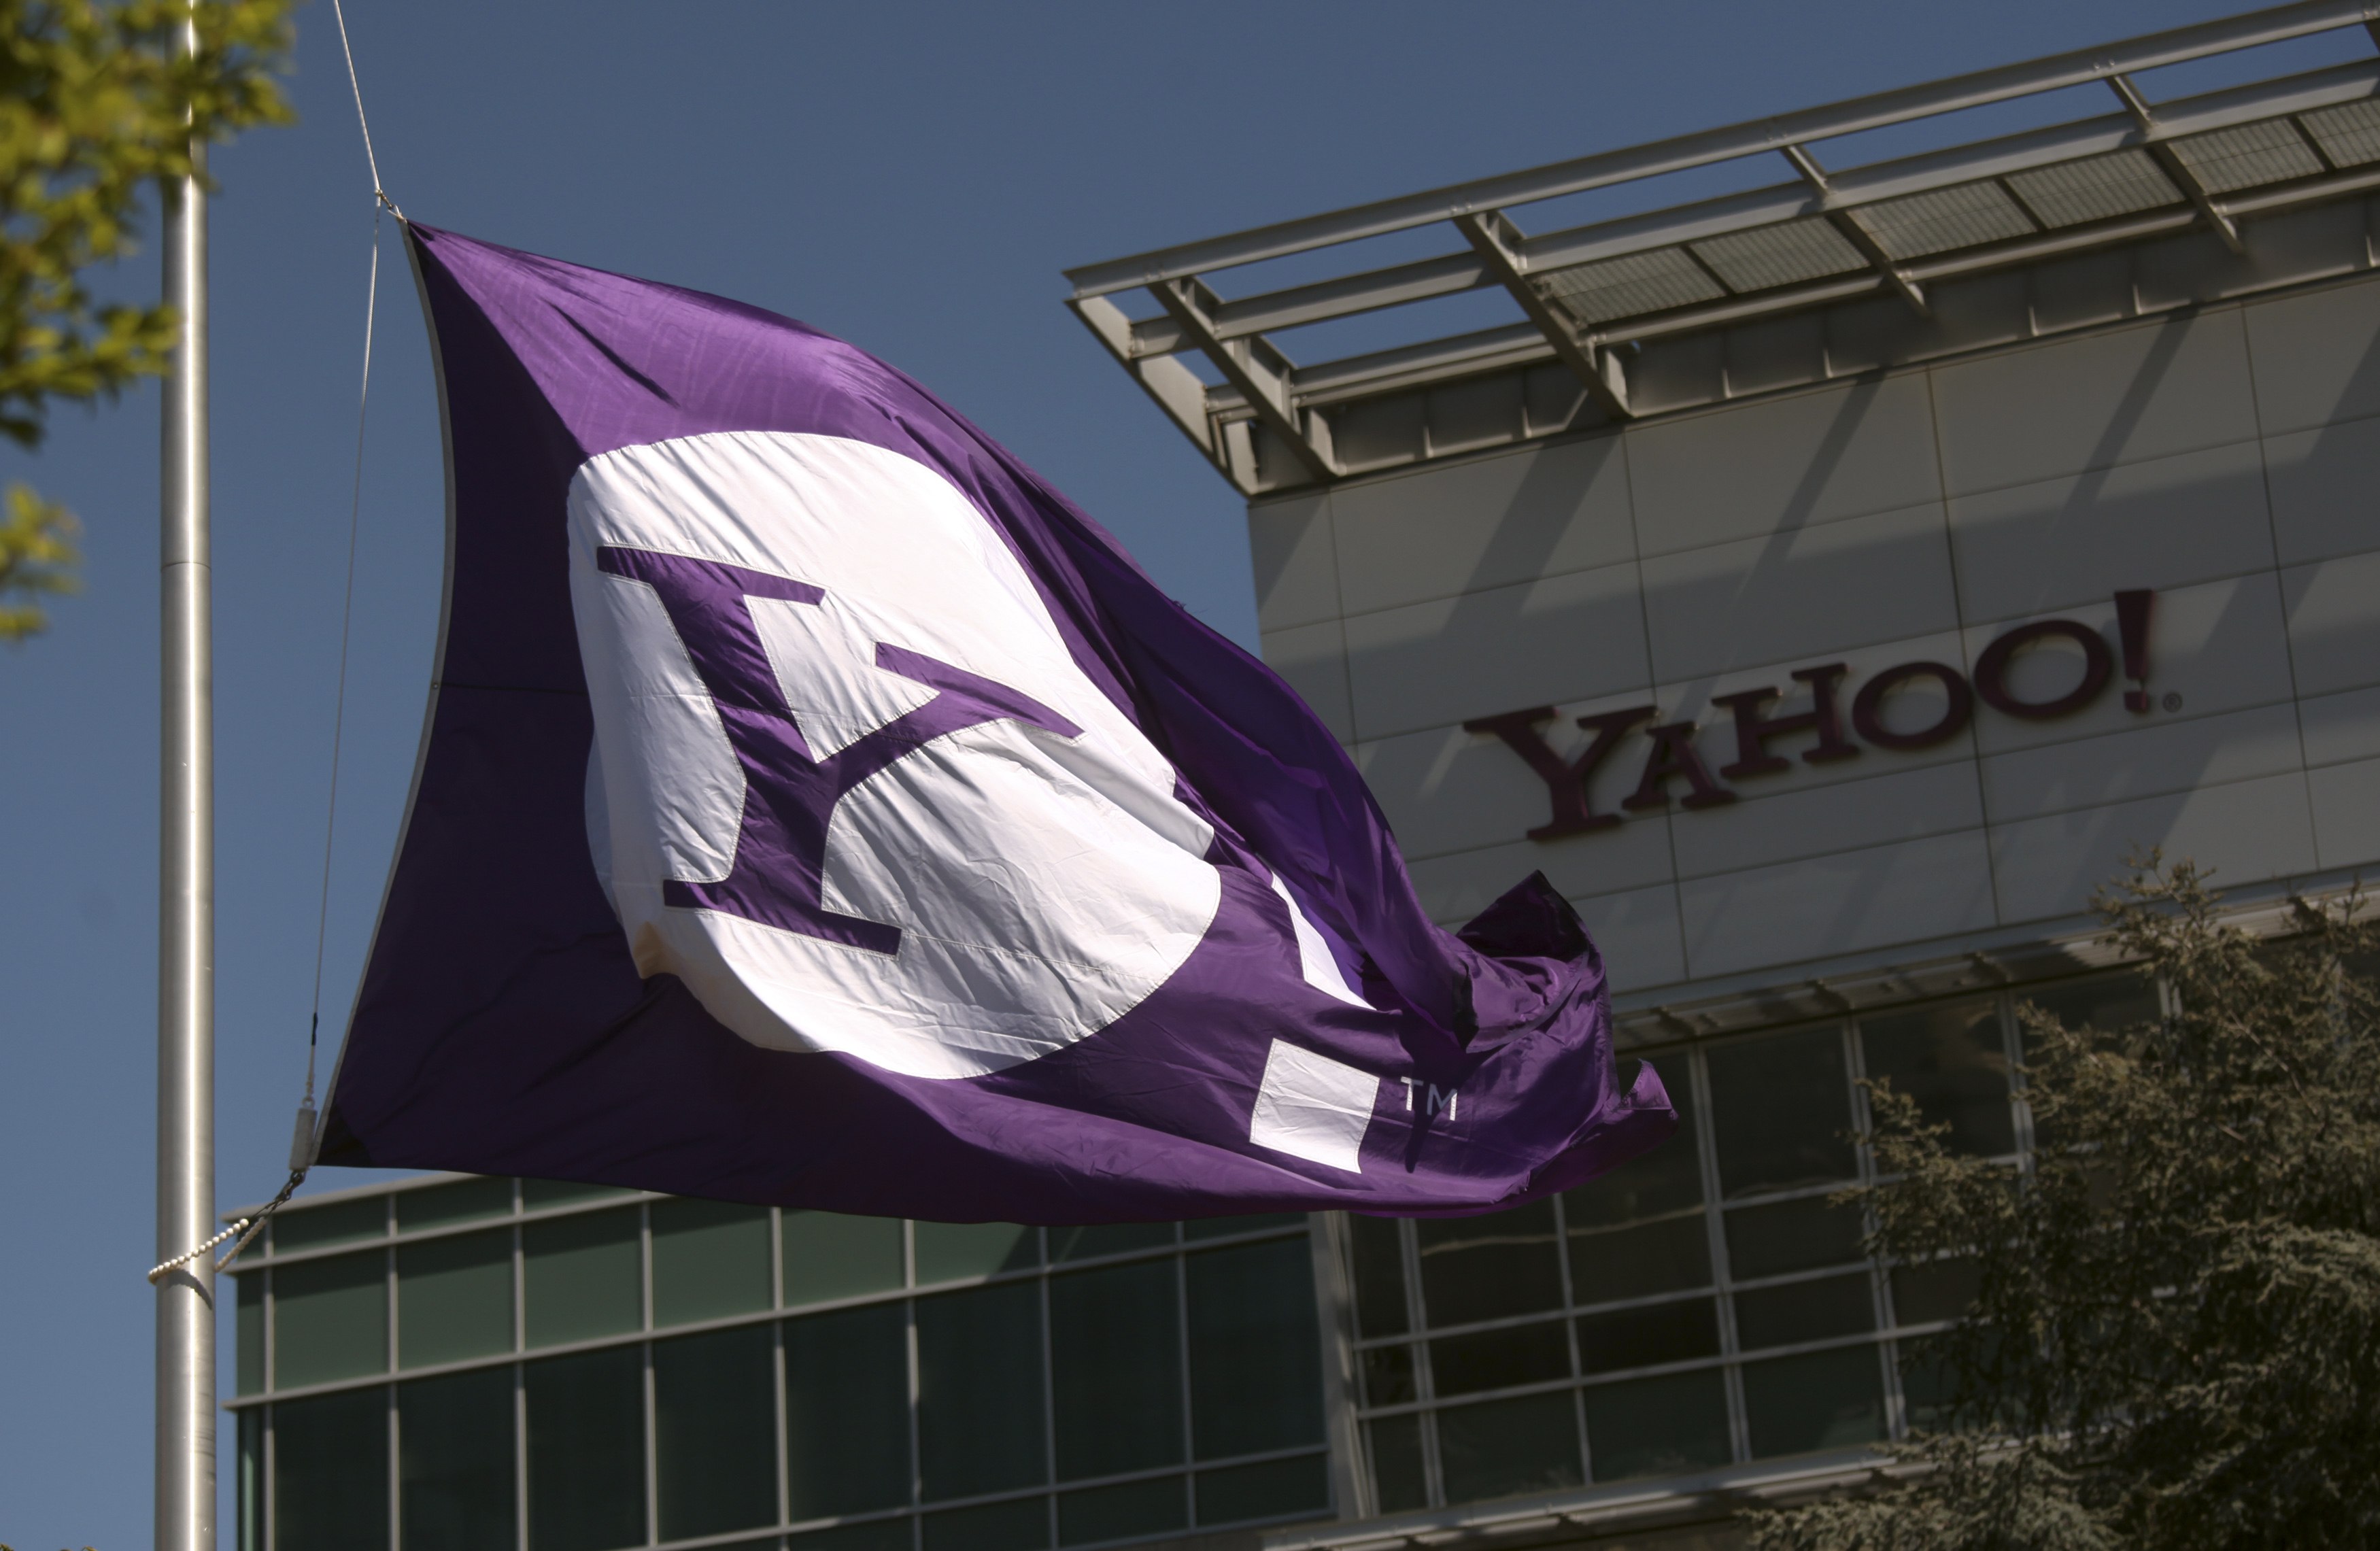 Yahoo says it is committed to protecting user data and will continue to contest requests and laws that it considers unlawful, unclear or overly broad. Photo: Reuters